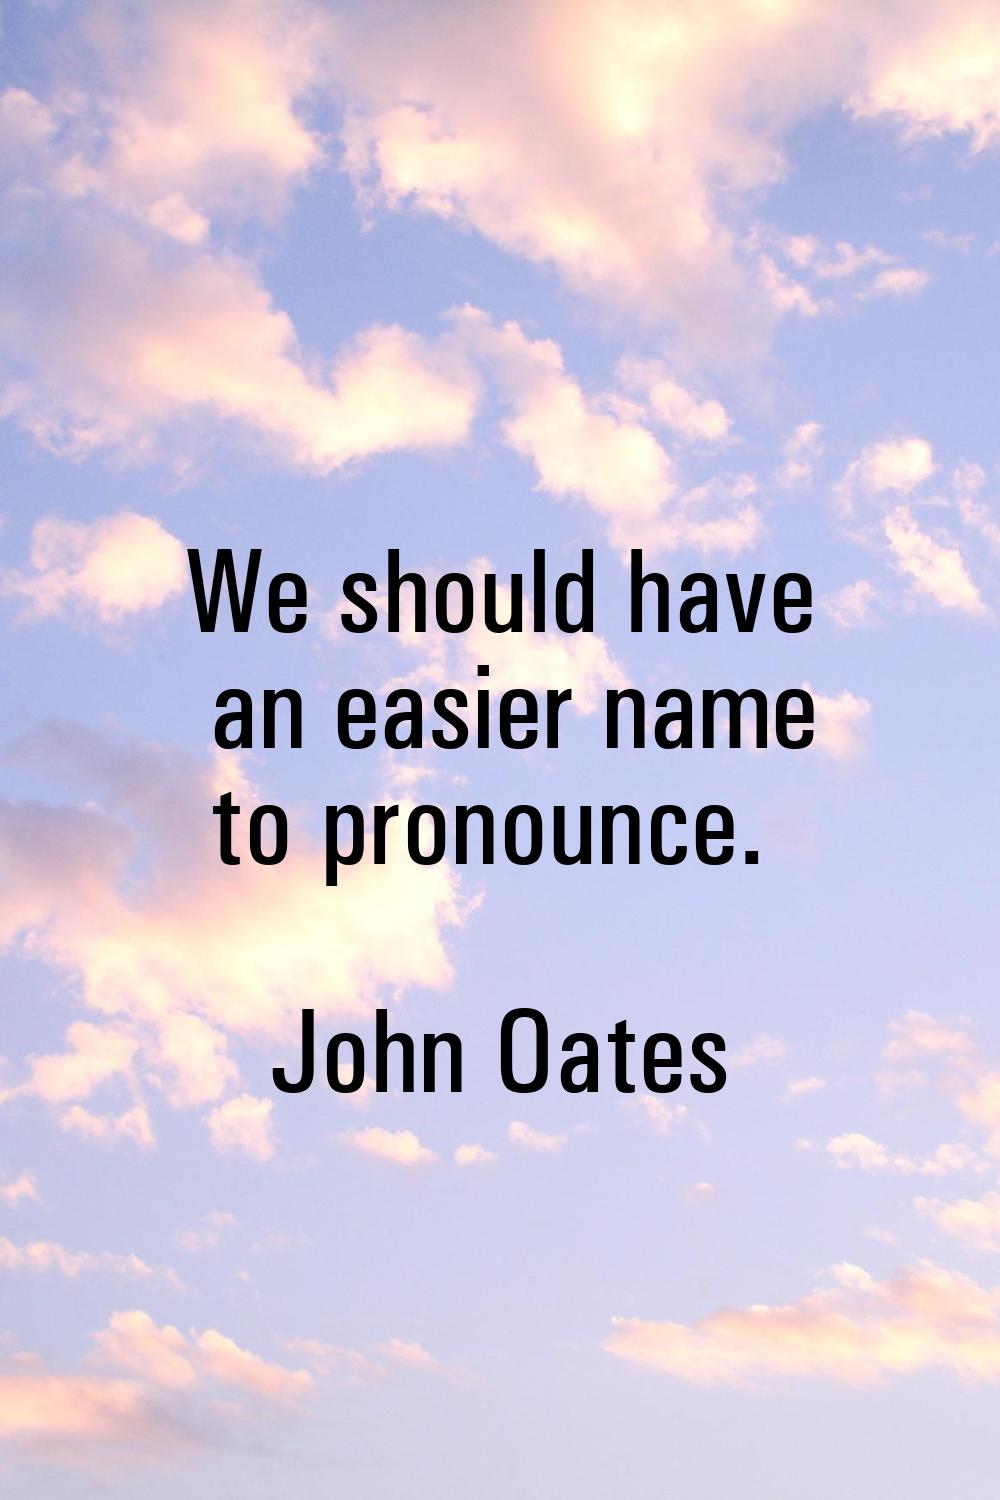 We should have an easier name to pronounce.